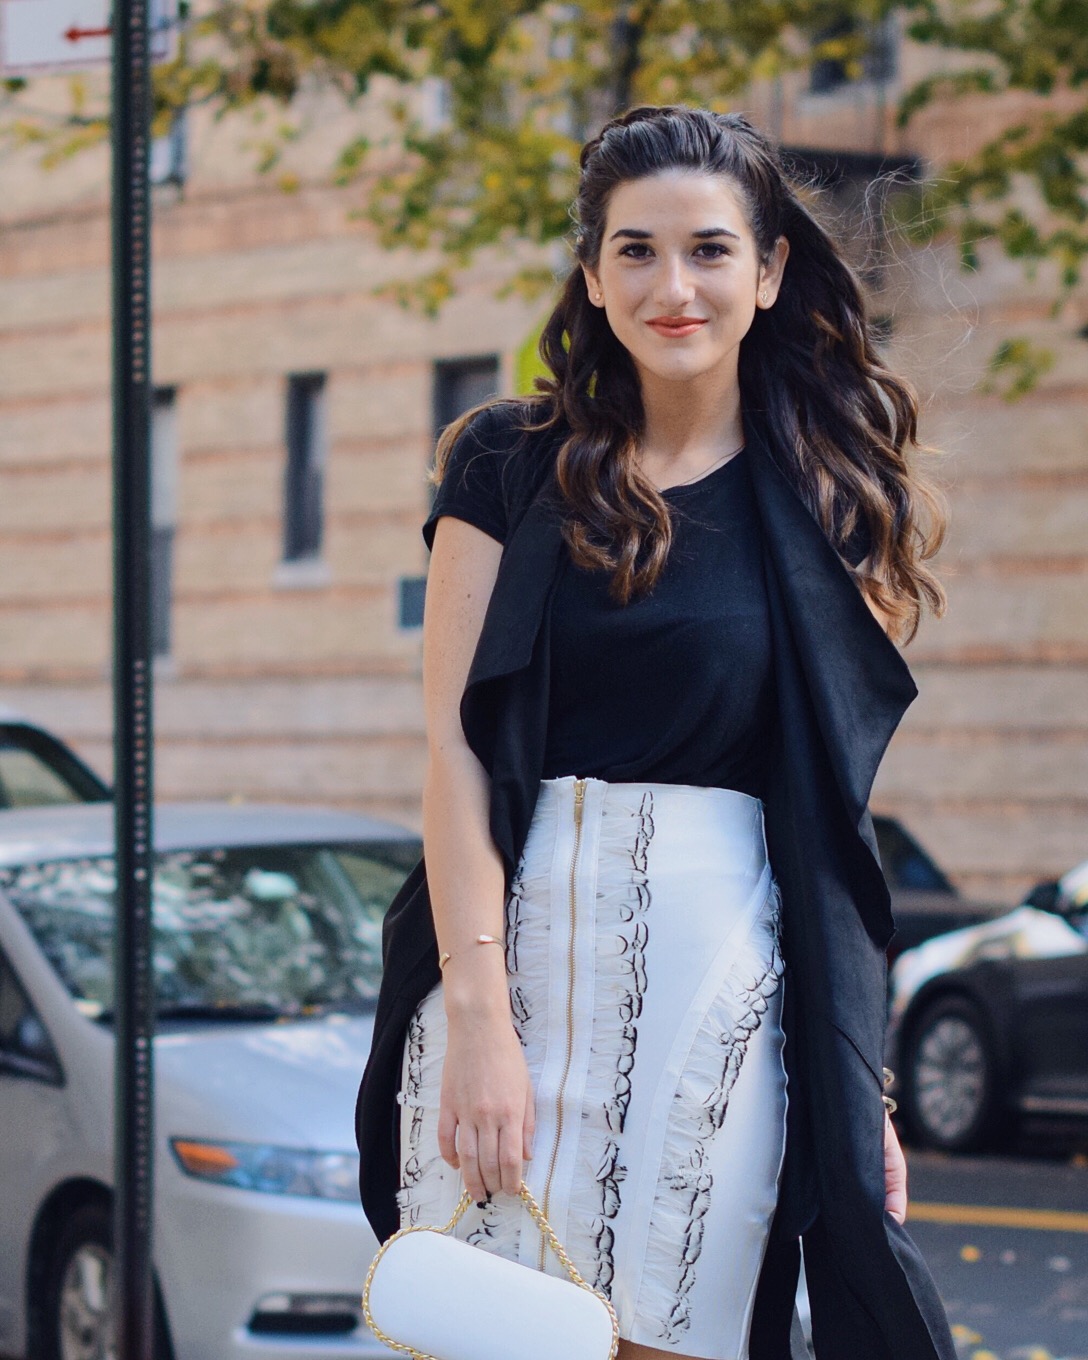 White Feather Skirt Long Black Vest Wow Couture Louboutins & Love Fashion Blog Esther Santer NYC Street Style Blogger Photoshoot Hairstyle Inspo Heels Gold Black Tee Zara Outfit OOTD Beauty Winter Fall Braid Girl Women Model Erin Dana White Minaudiere.JPG